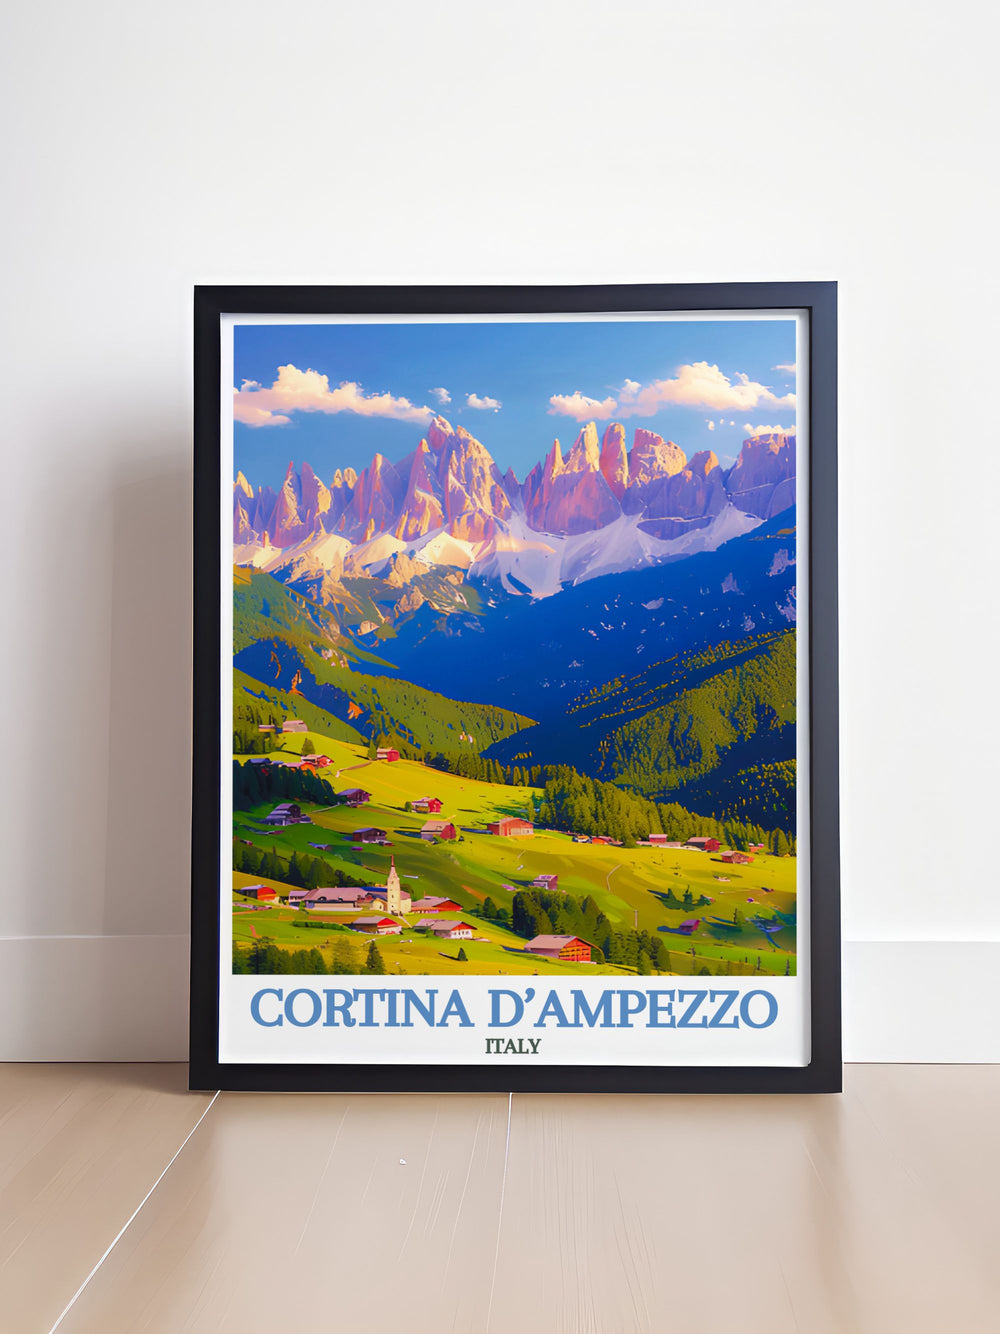 Bring the beauty of Italy into your home with our Dolomite Mountains art prints. Highlighting the dramatic landscapes and alpine charm of Cortina dAmpezzo, these prints are perfect for creating a serene and inspiring atmosphere in any room.